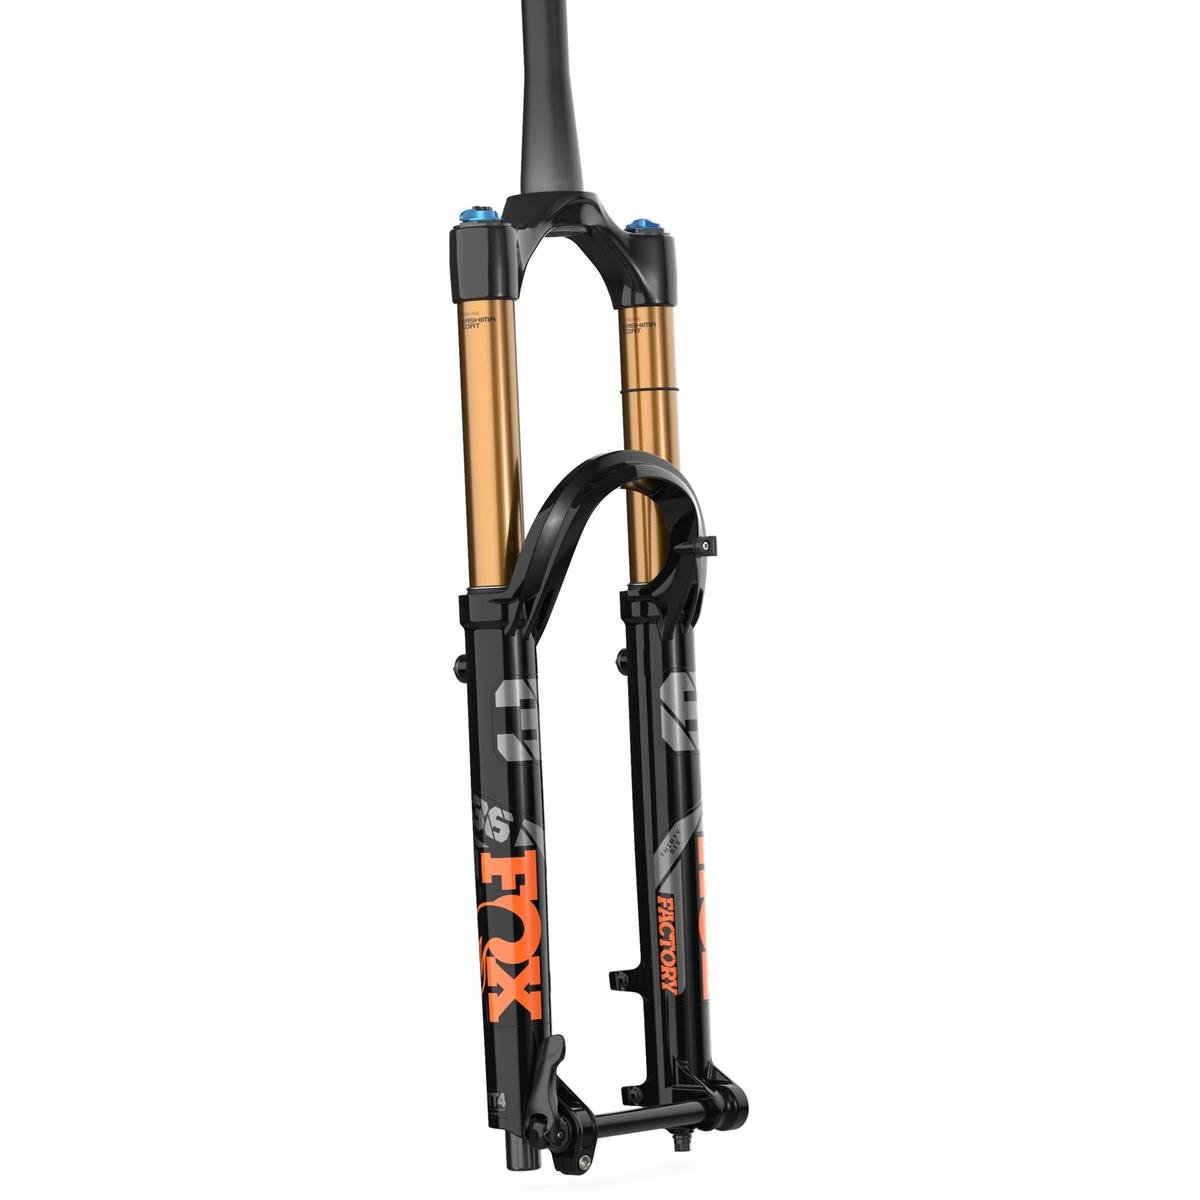 Fox Racing Shox Suspension Fork 36 Float Factory Kashima 27.5 Inches, 15x110 mm, FIT4, 44 mm Offset, 160 mm